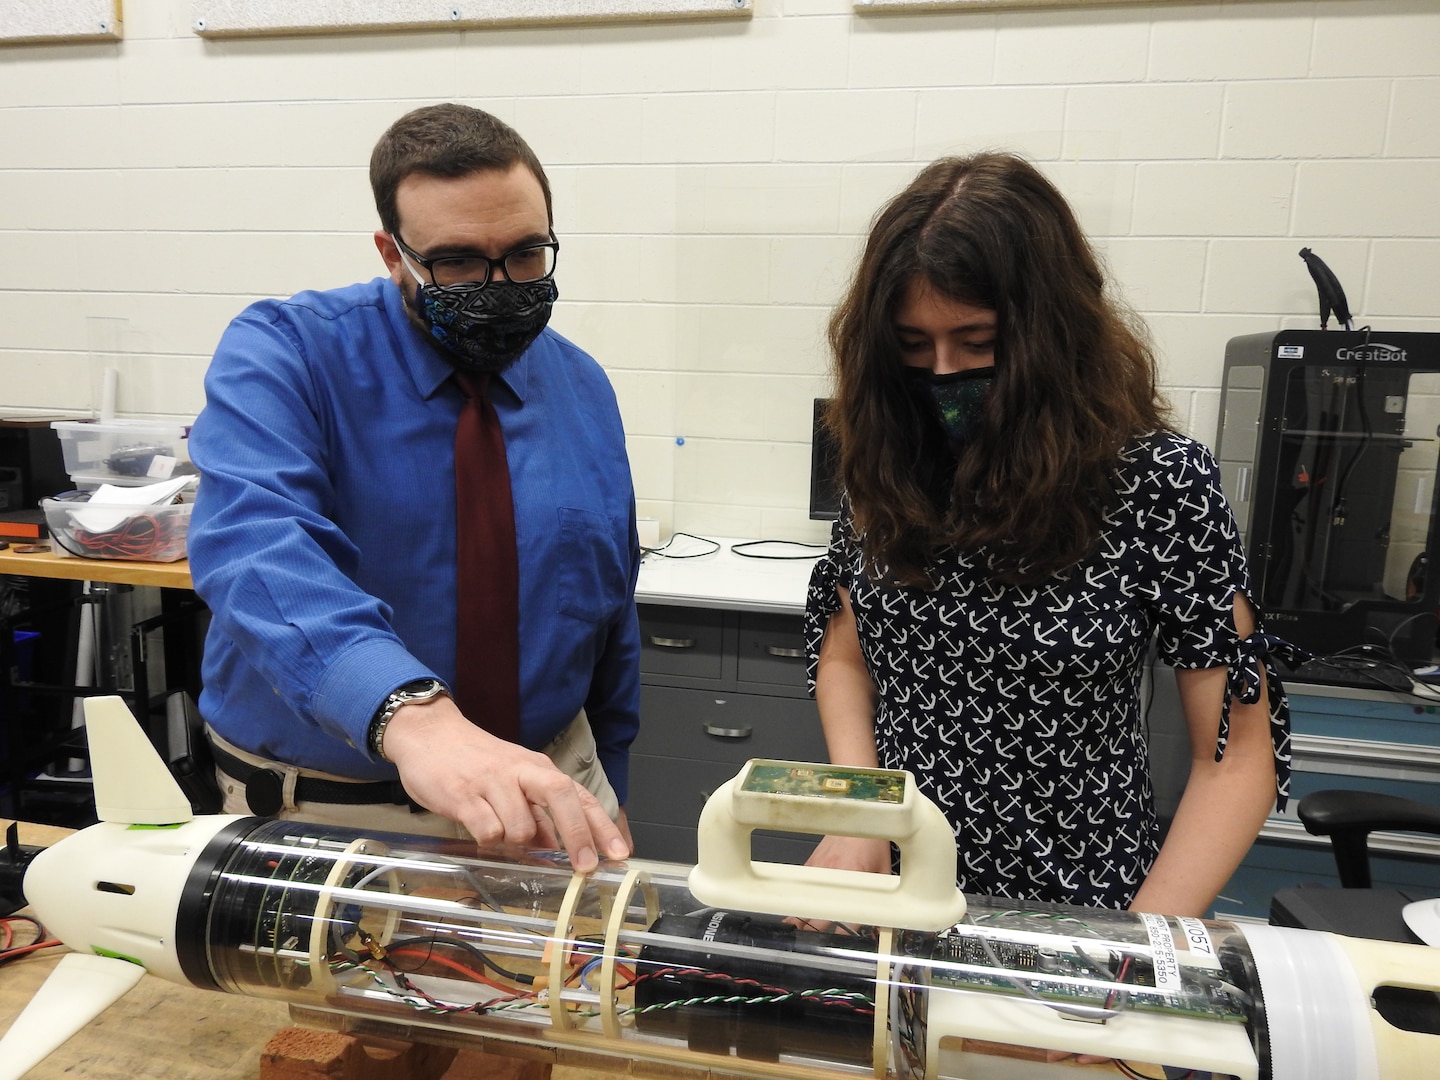 The Naval Surface Warfare Center Panama City Division (NSWC PCD) has made their selections for this year’s Science Mathematics and Research for Transformation (SMART) scholarship recipients.  In this photo, Dr. J. D. Walsh, applied sensing and processing branch head at NSWC PCD, describes components of an unmanned system to SMART scholar recipient Jacqueline Jermyn.